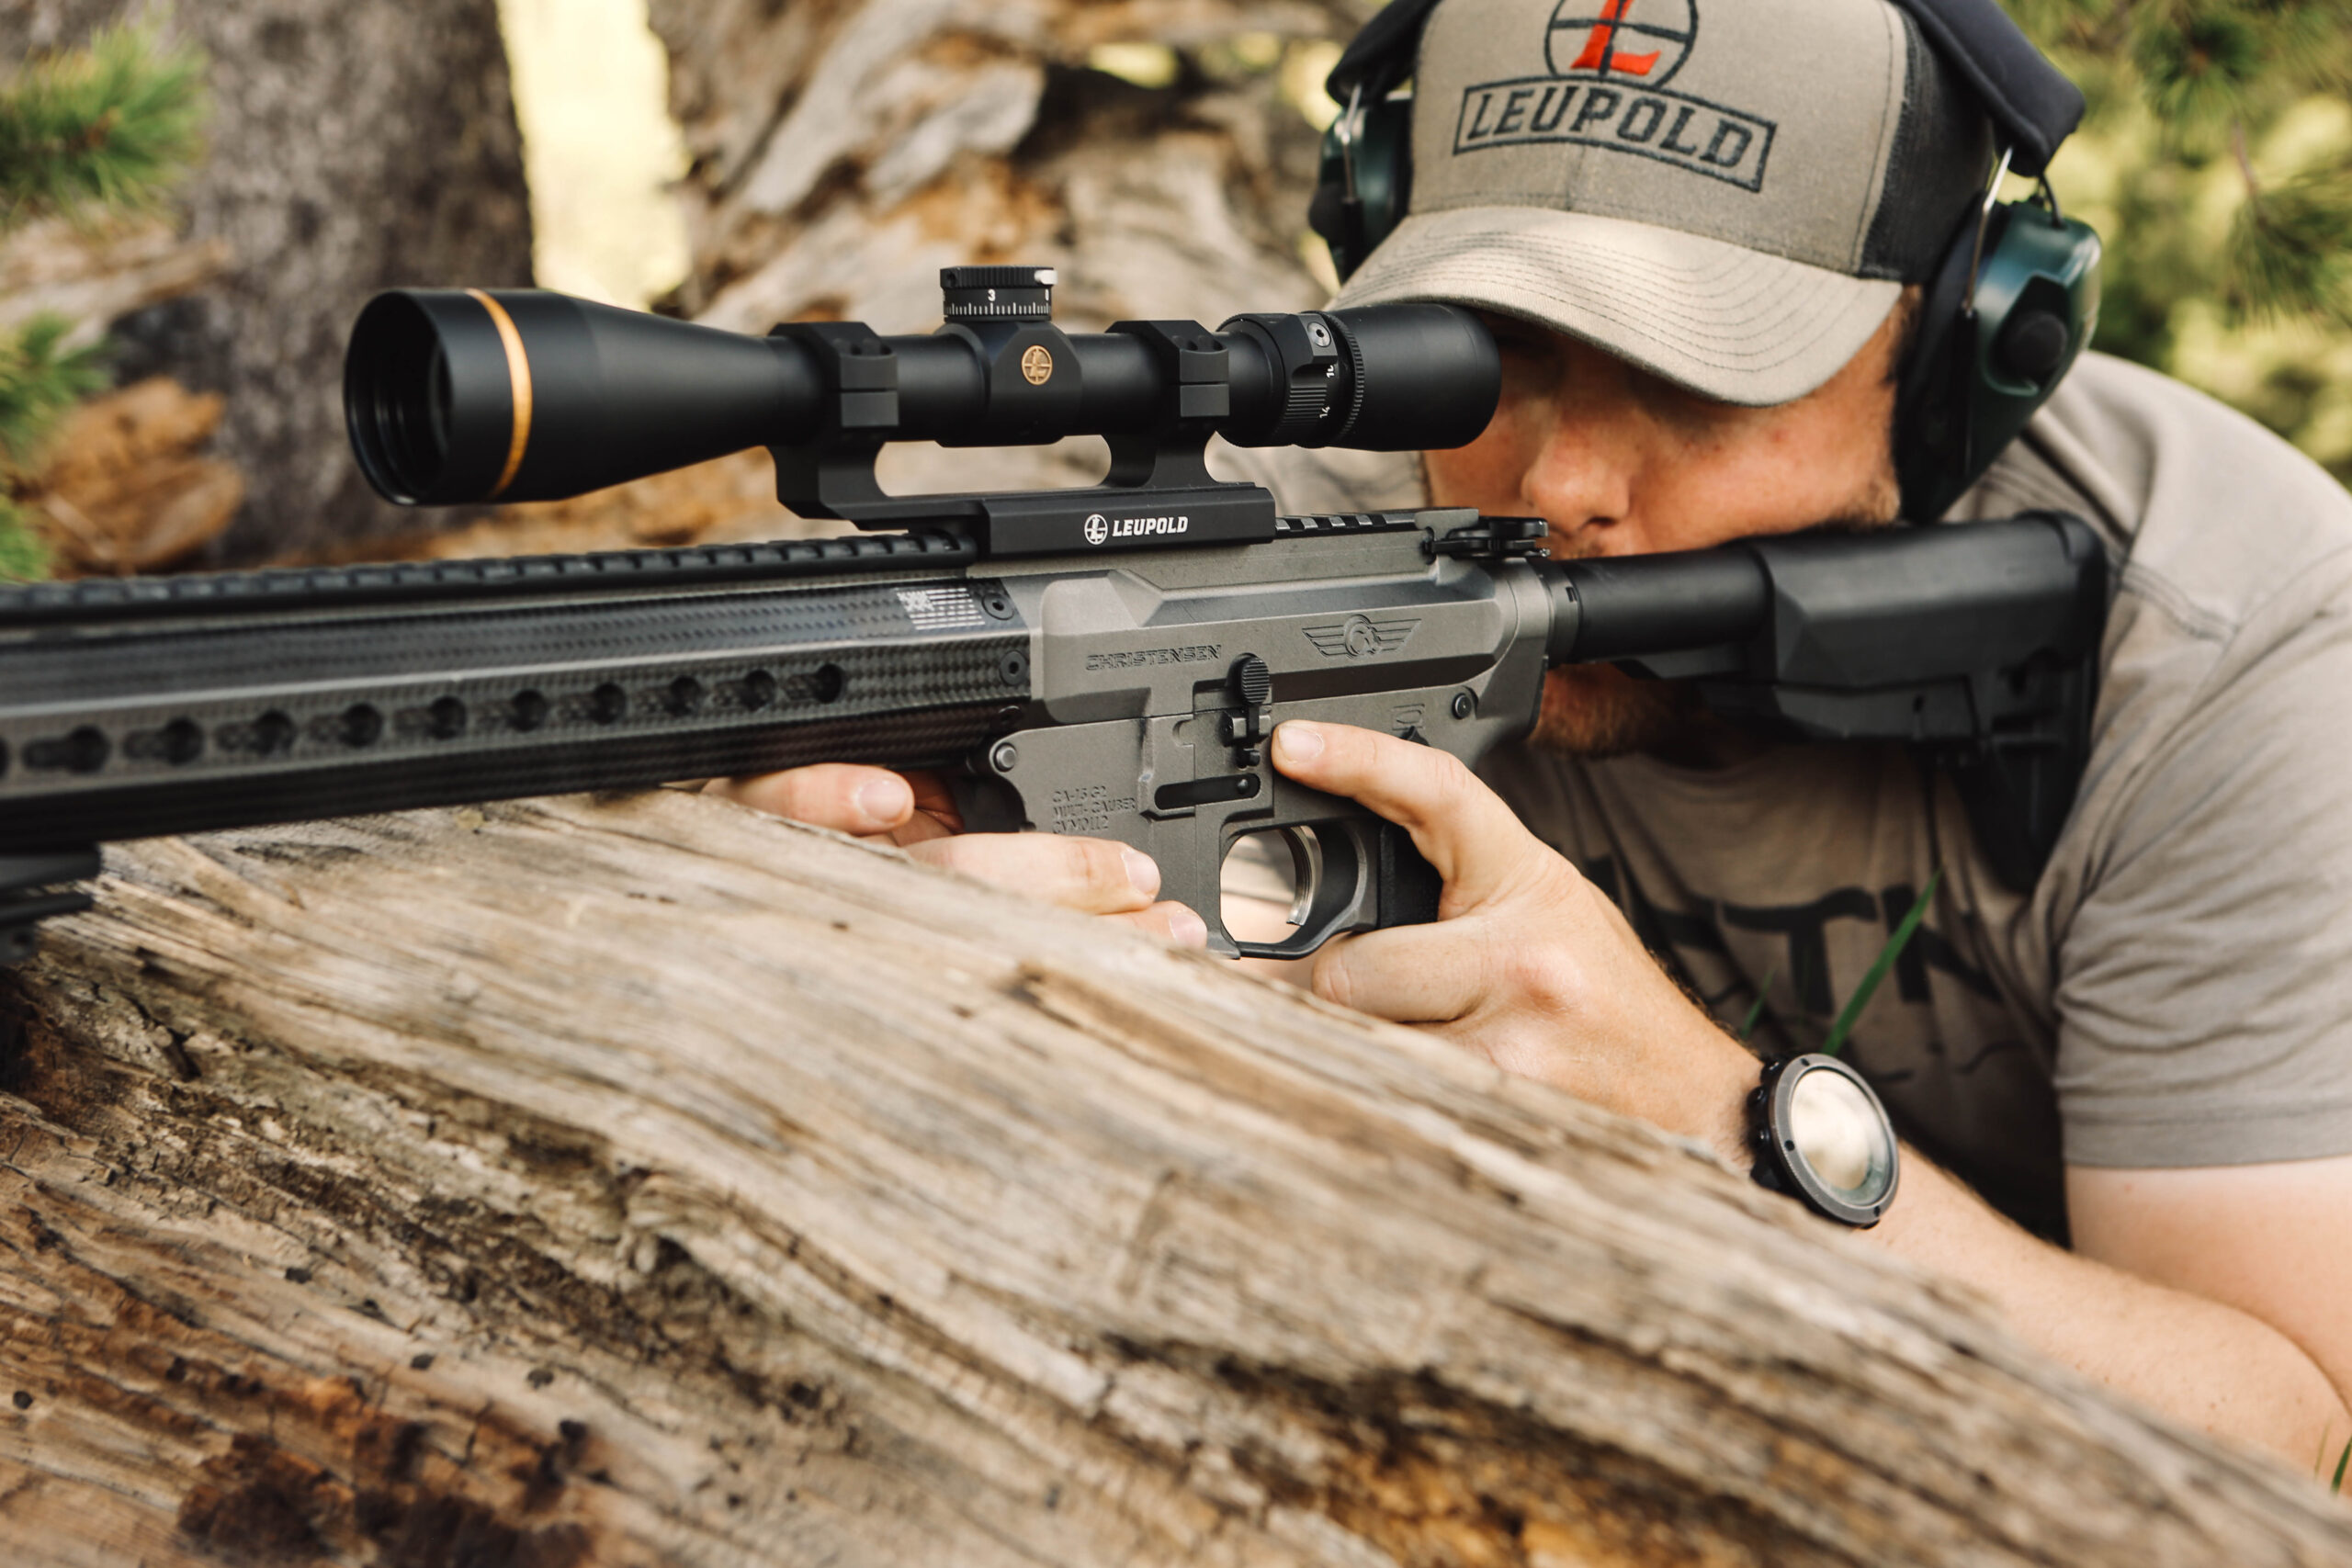 The CA-15 id ideal for hunting coyotes.